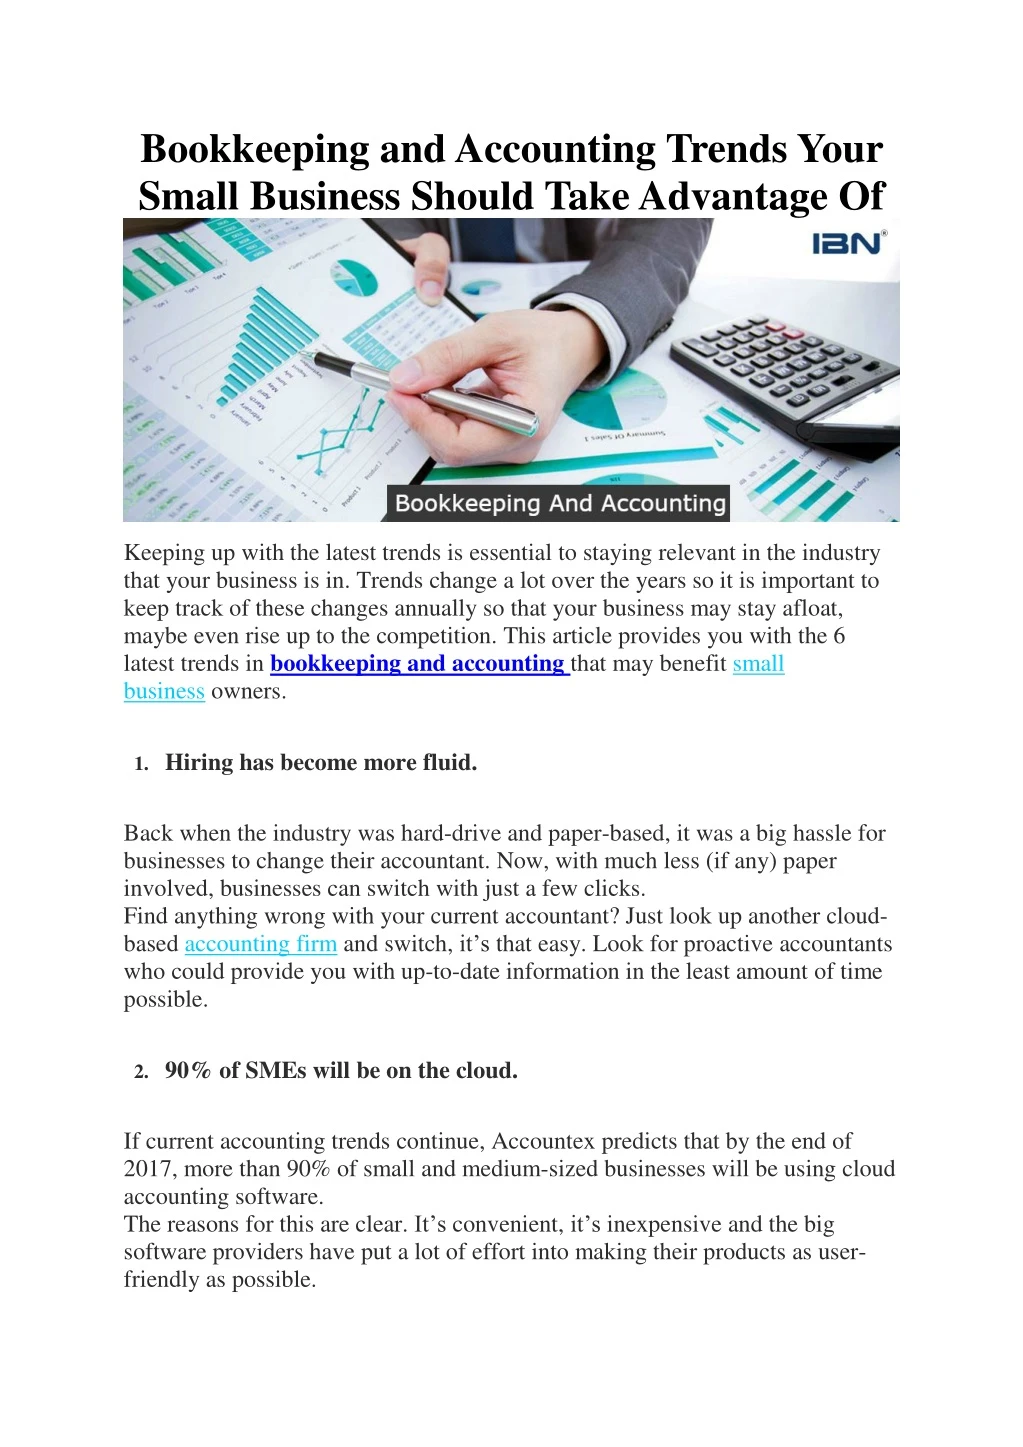 bookkeeping and accounting trends your small